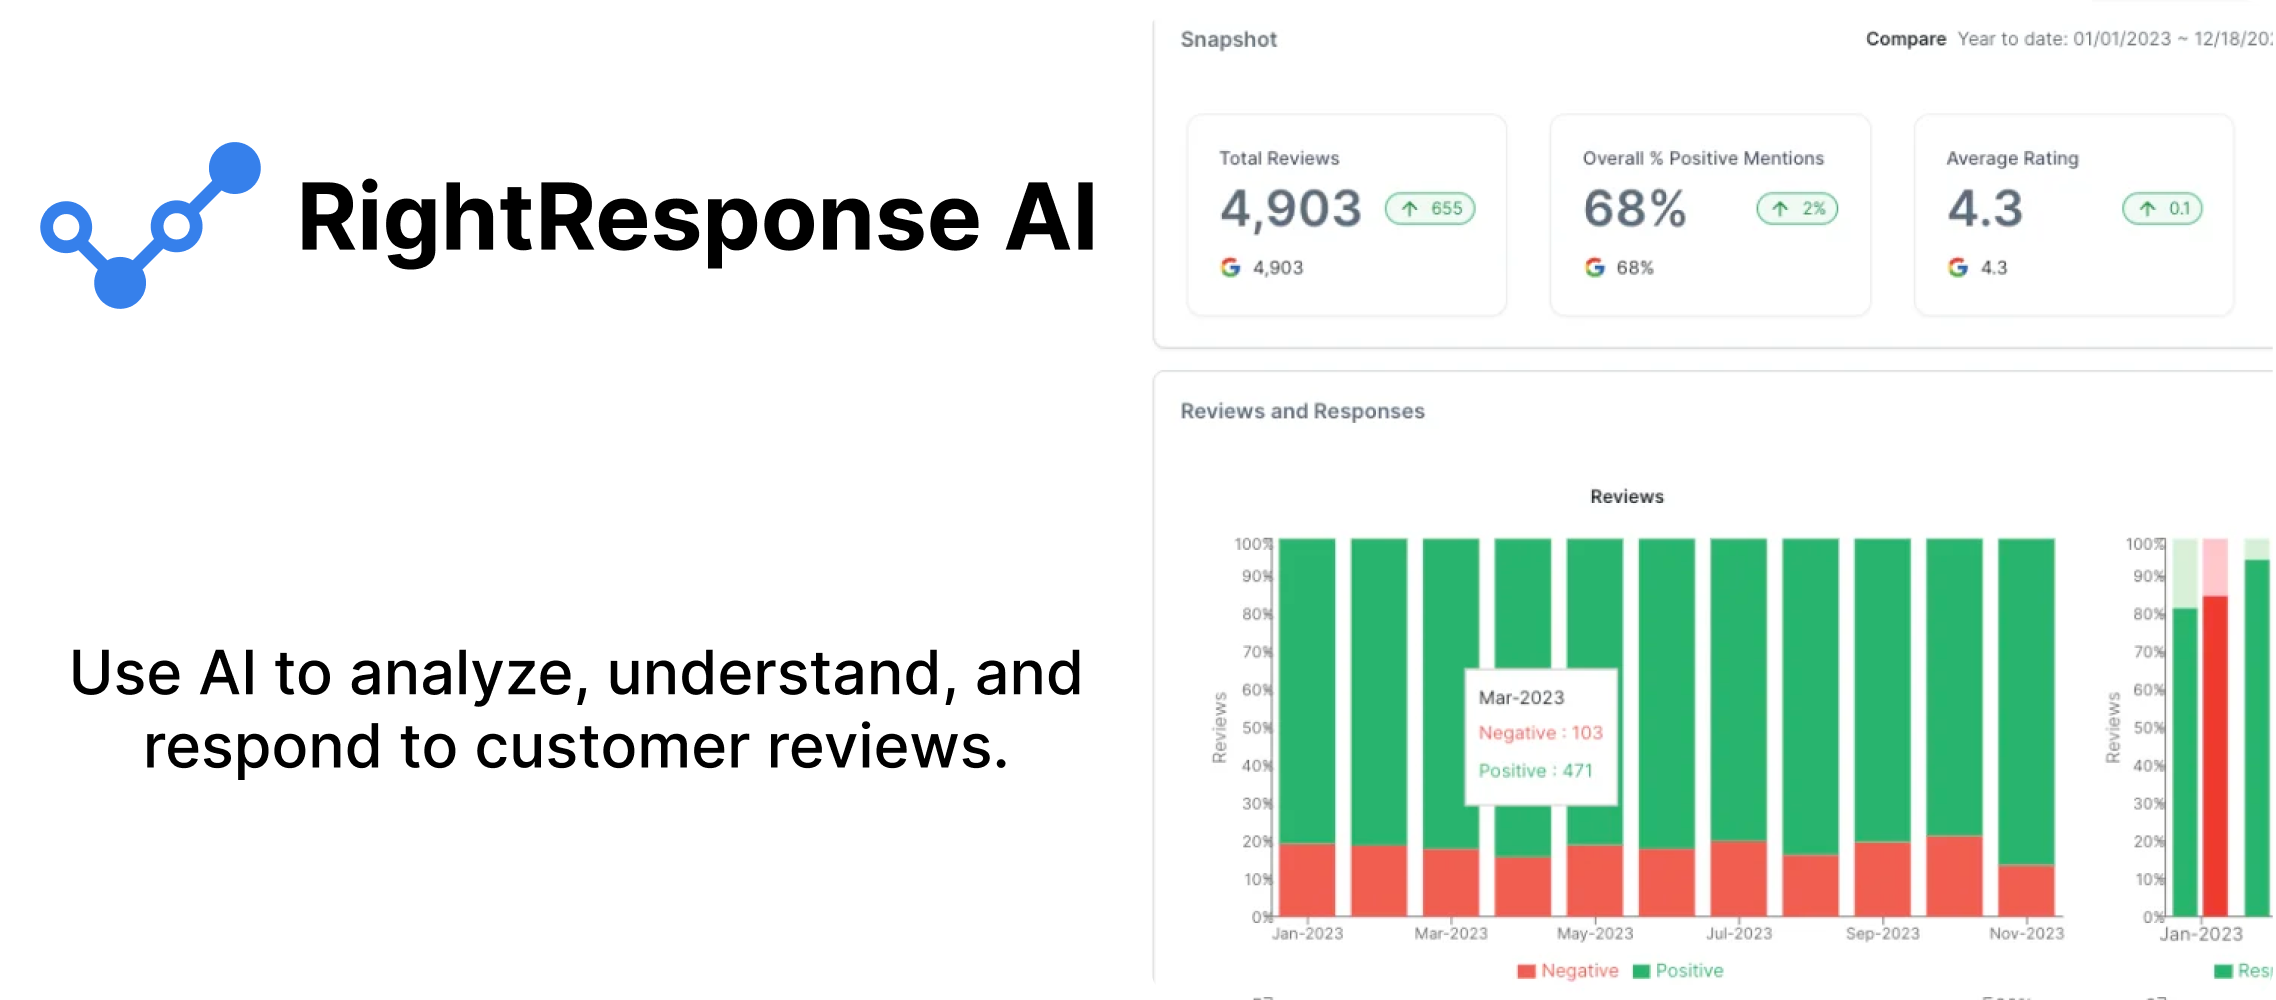 Use Intelligent AI to analyze, understand, and respond to customer reviews within the RightResponse AI Dashboard